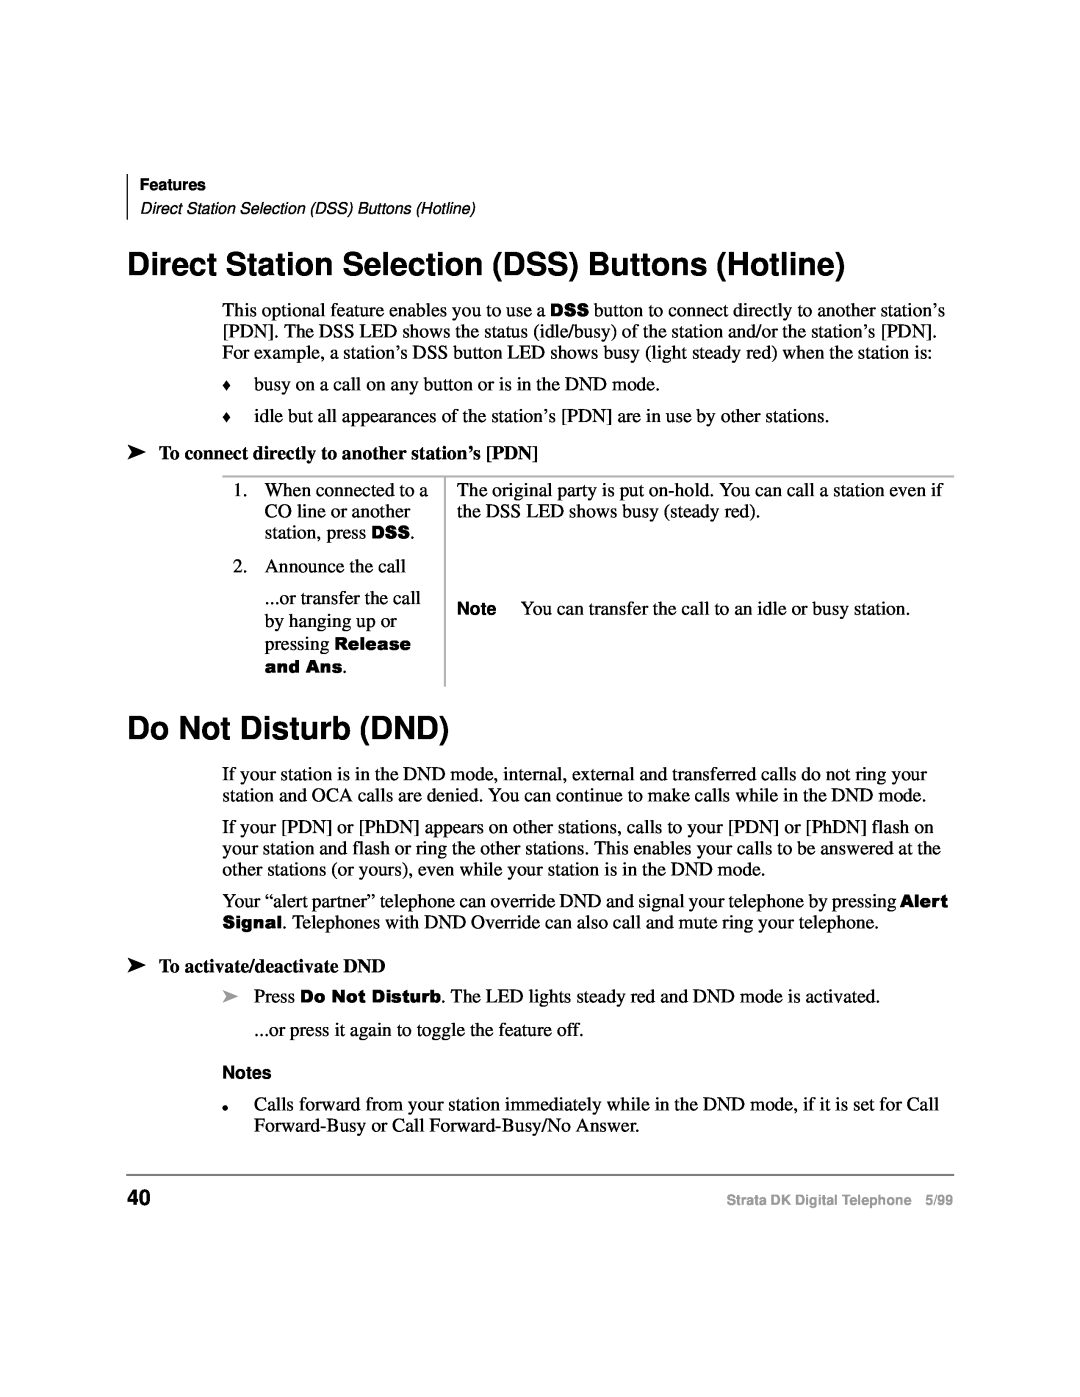 Toshiba CT Direct Station Selection DSS Buttons Hotline, Do Not Disturb DND, To connect directly to another station’s PDN 